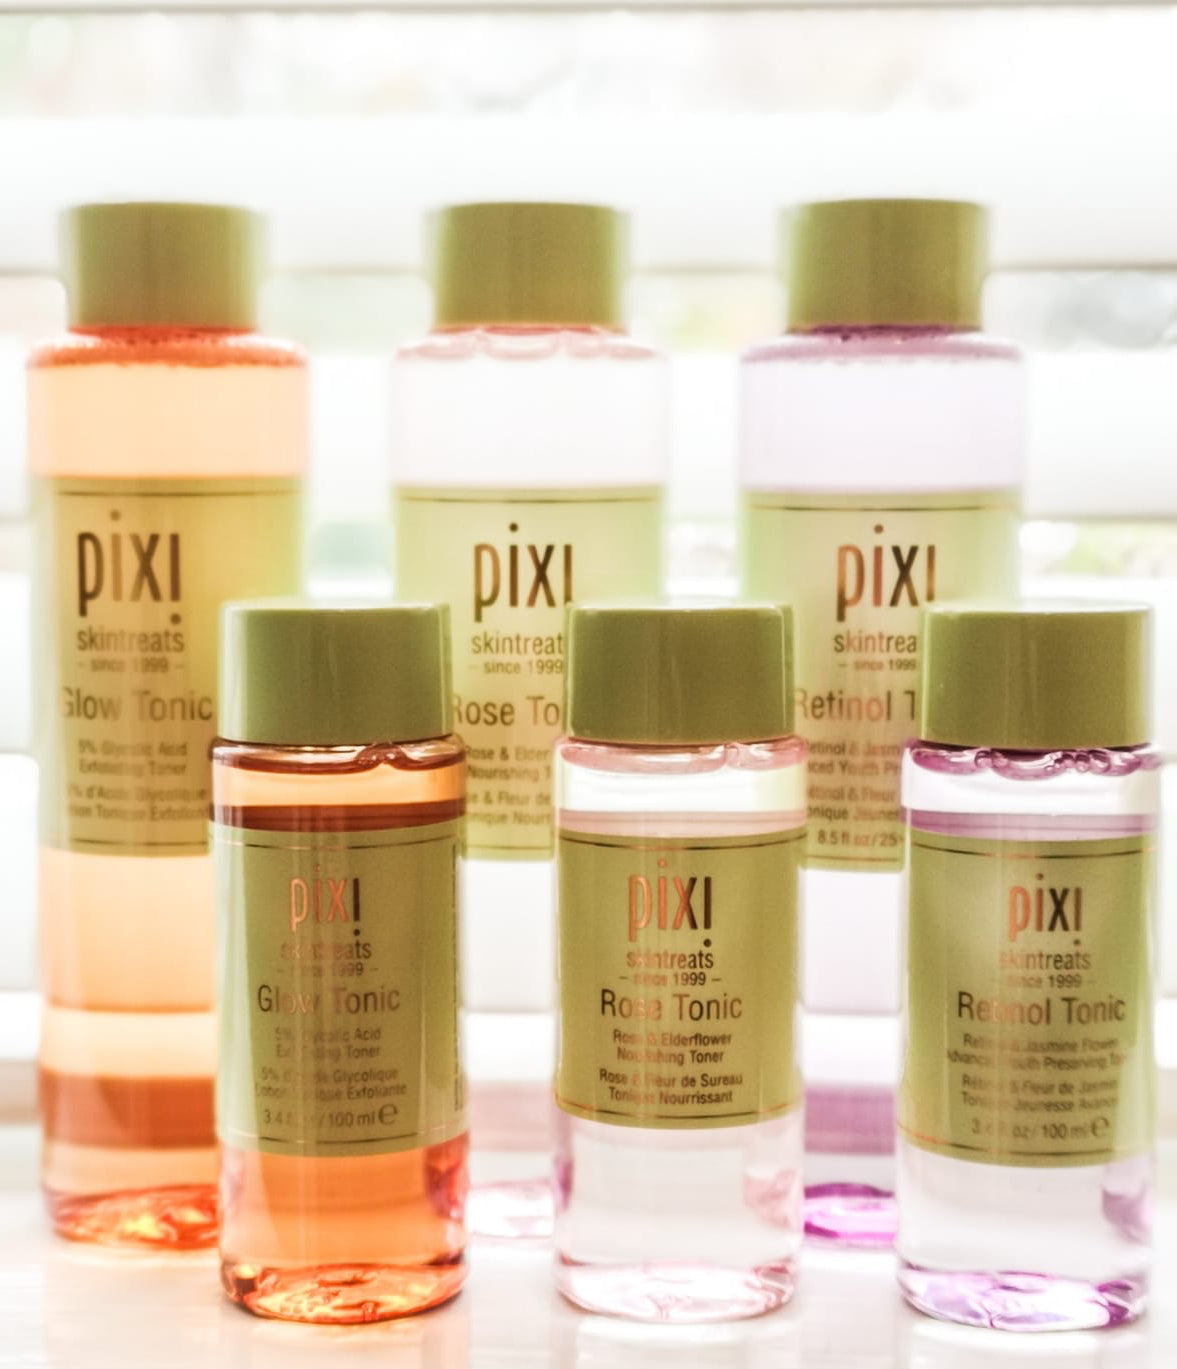 PIXI TONICS OVERVIEW AND UPCOMING EVENTS